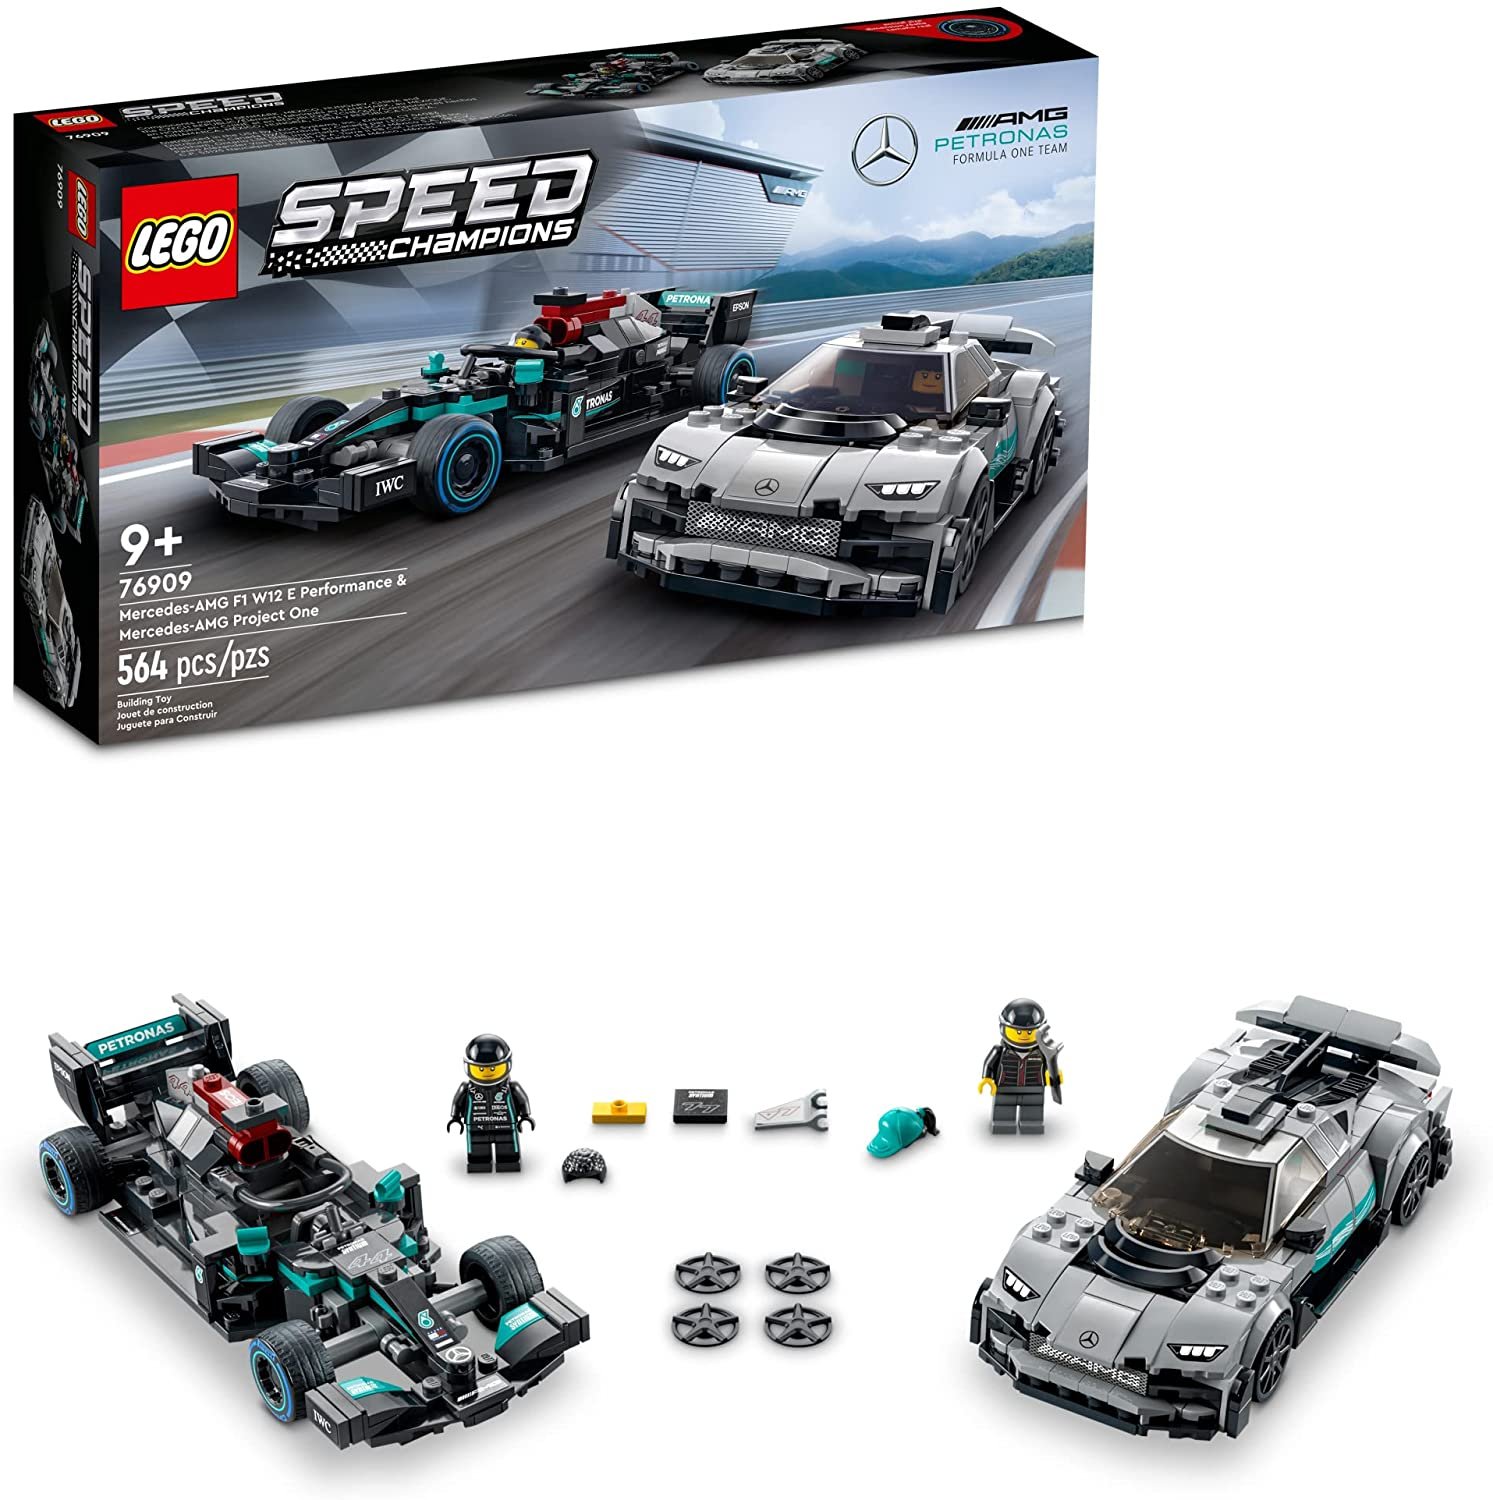 LEGO Speed Champions Mercedes-AMG F1 W12 E Performance & Project One 76909 Building Kit